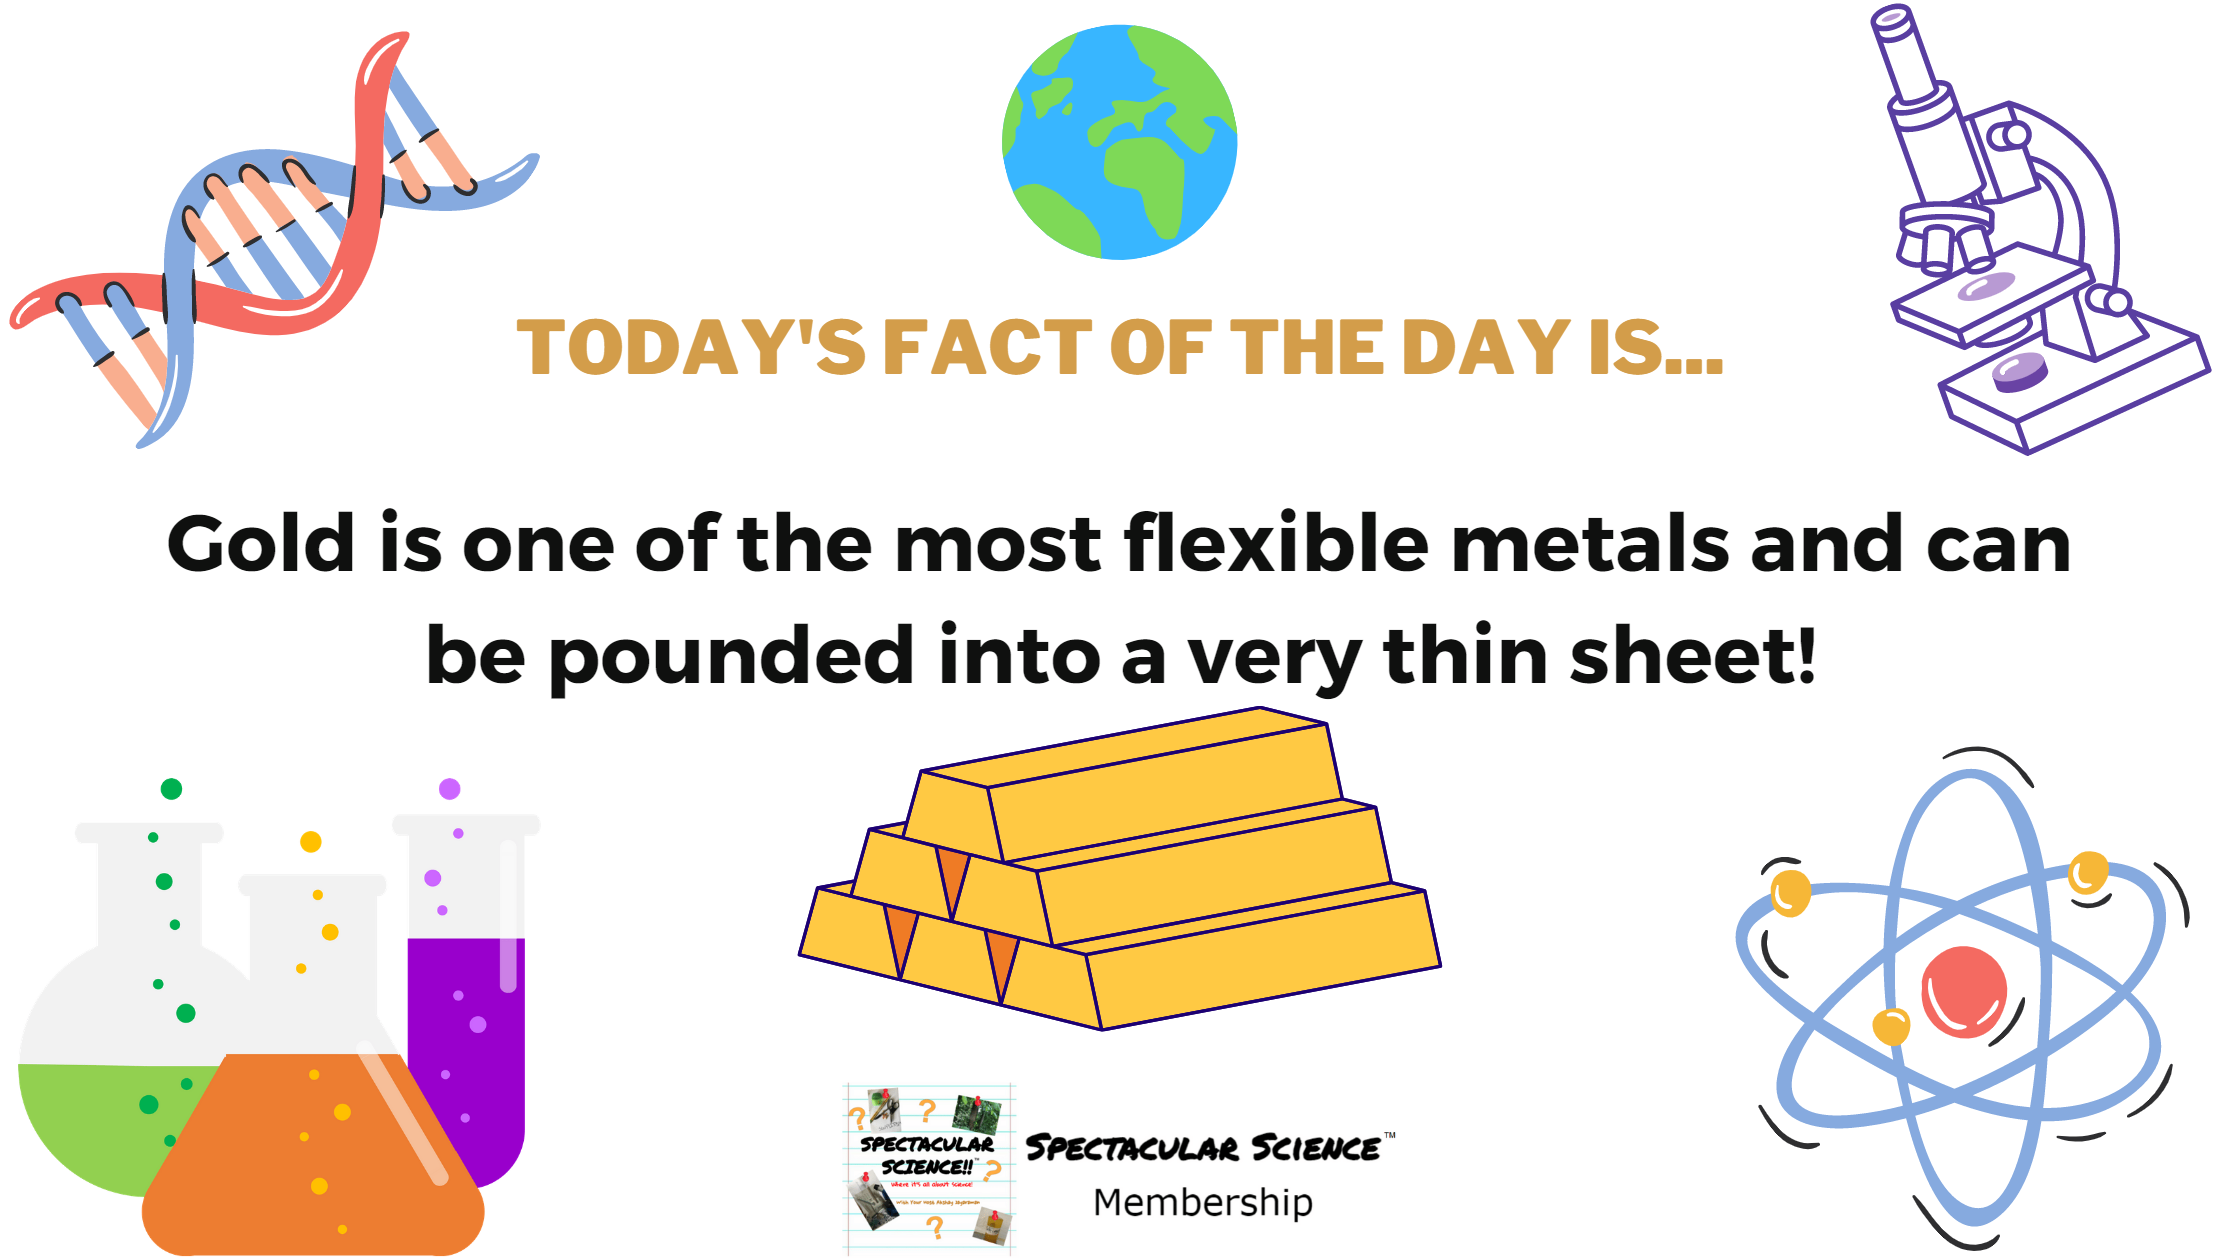 Fact of the Day Image March 2nd